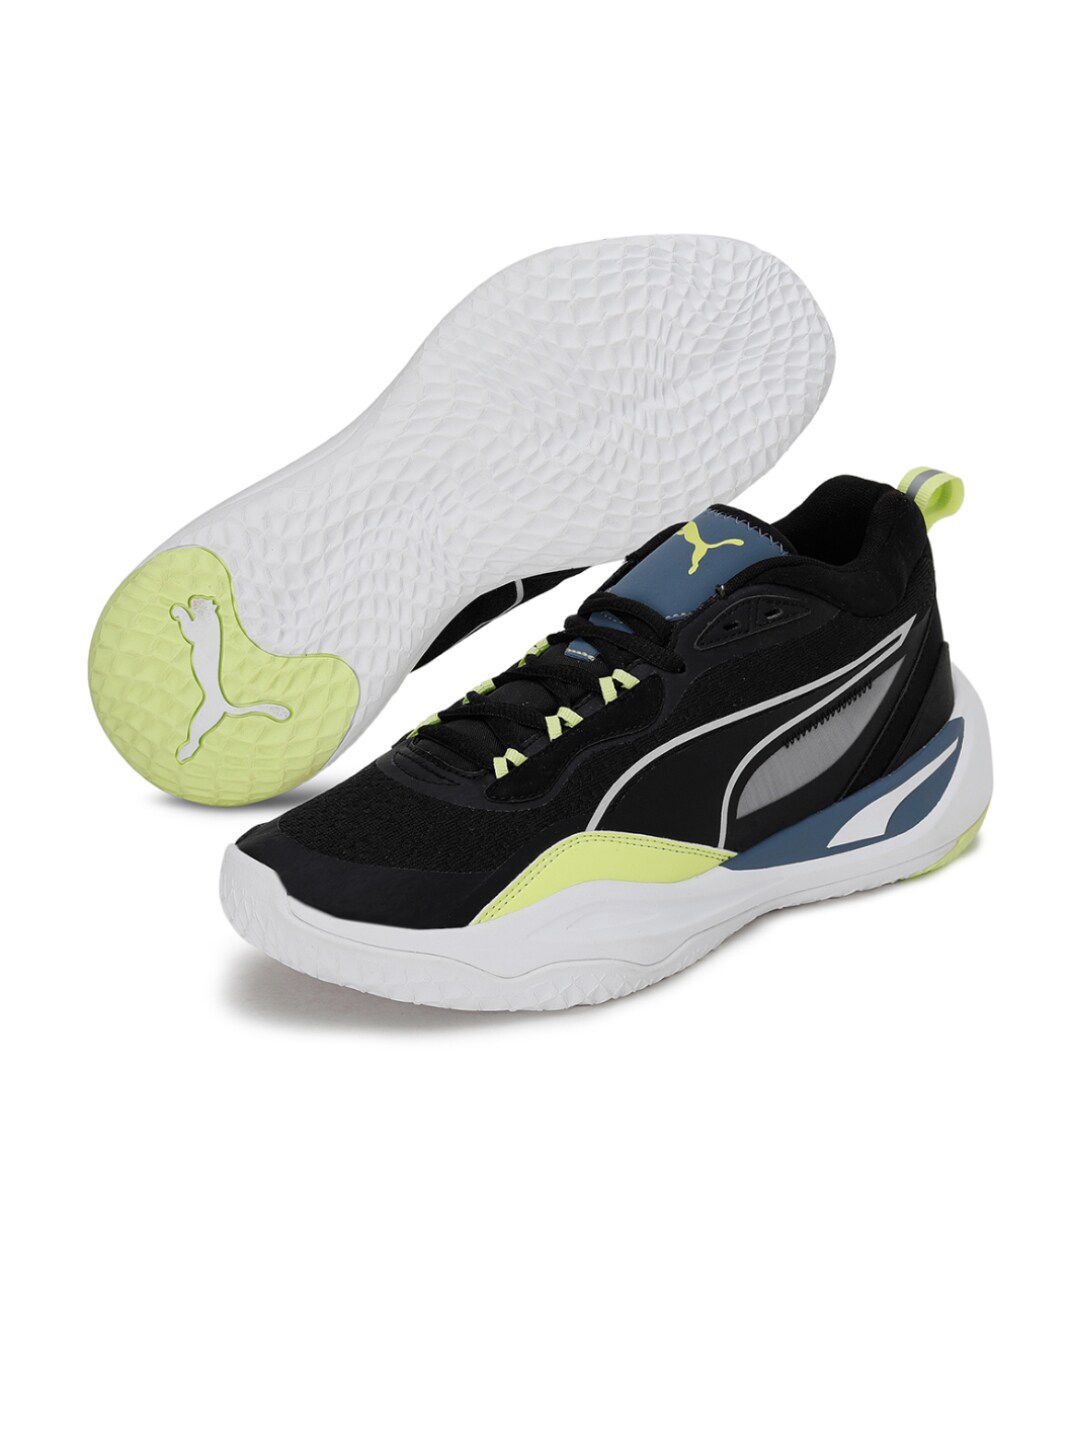 Puma Unisex Black Playmaker in Motion Sneakers Price in India